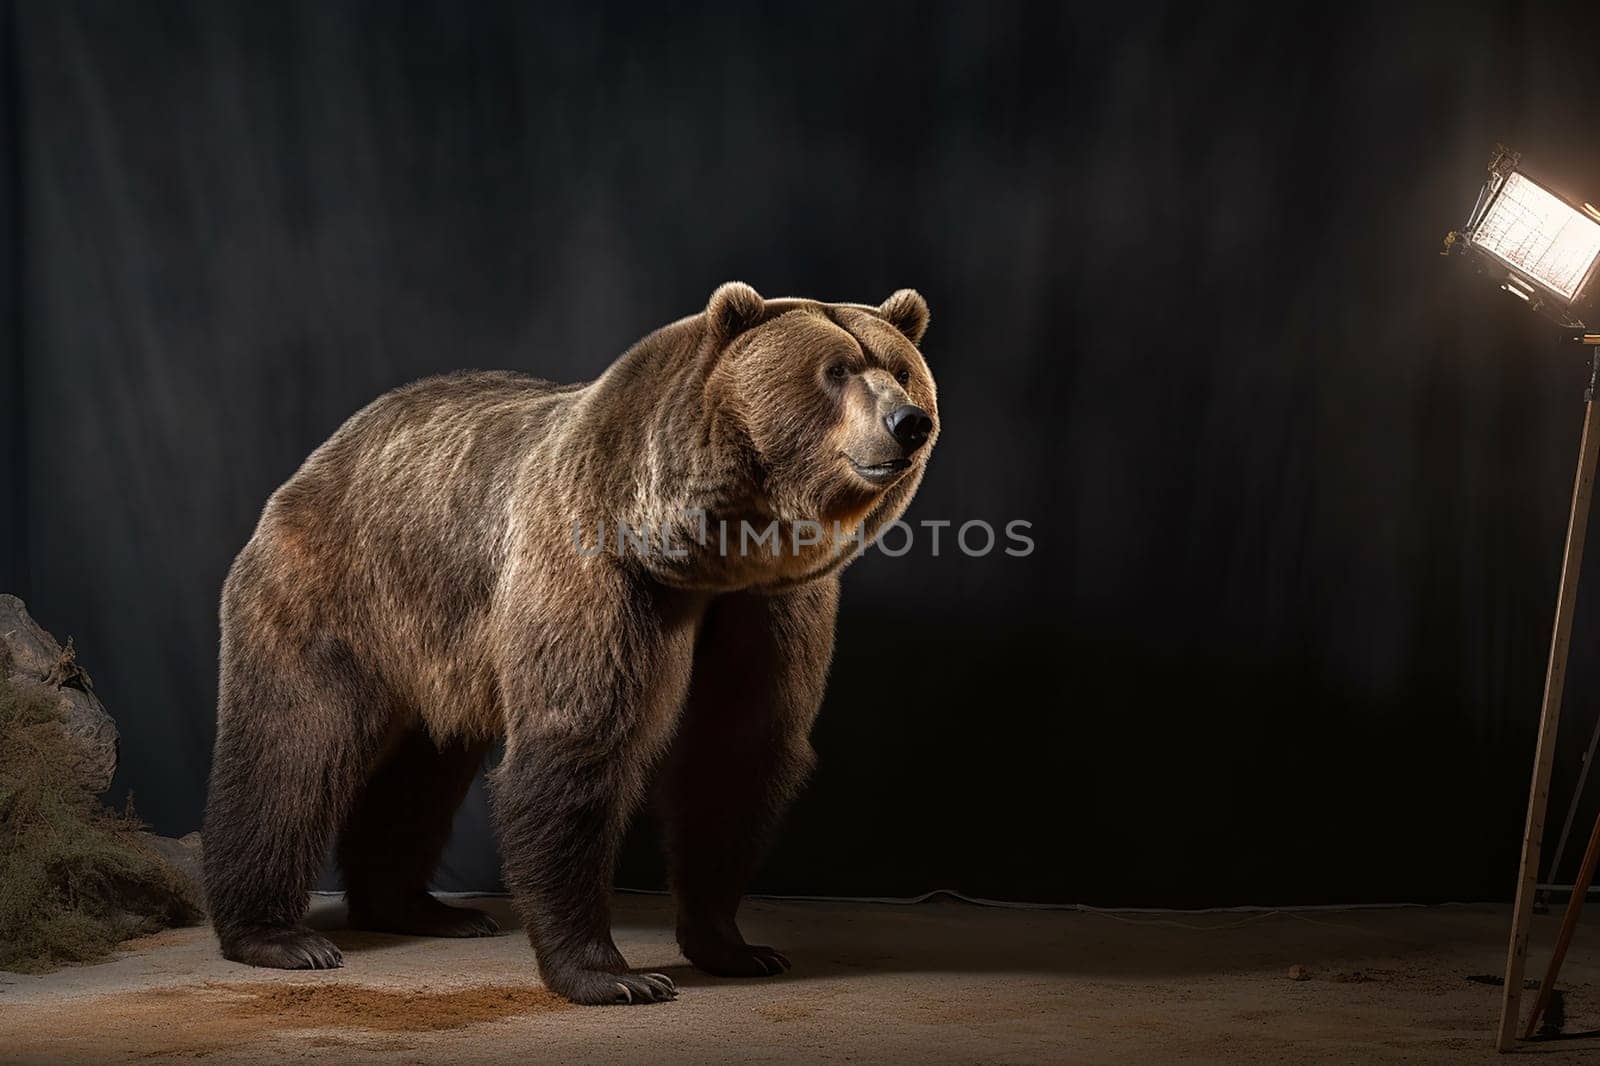 A photo of a brown bear on a filming stage, black background